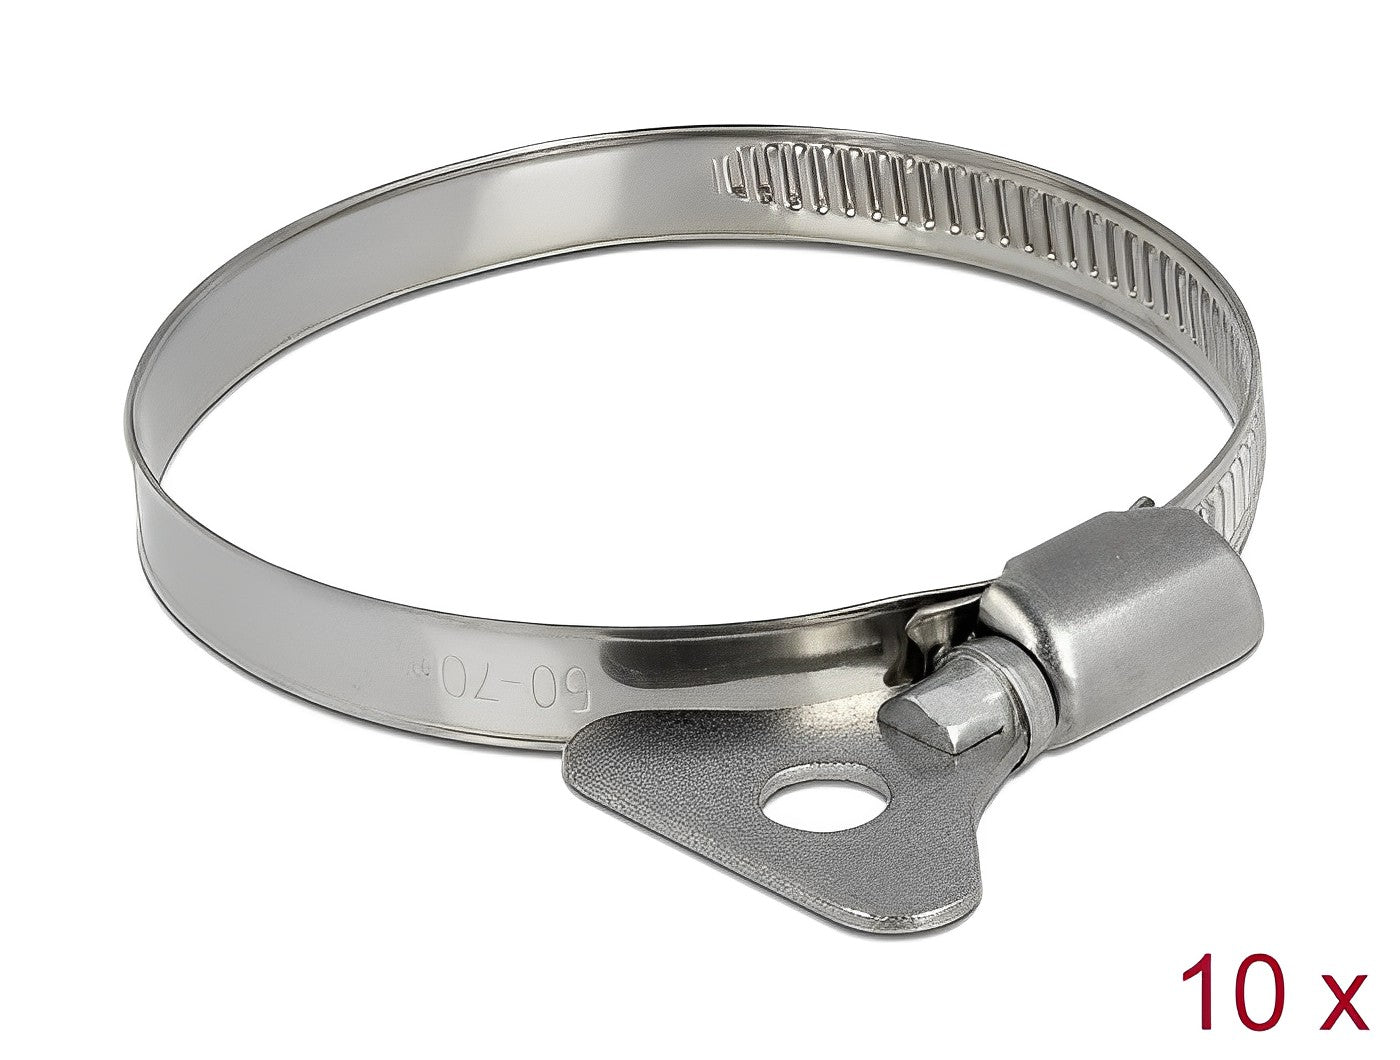 Delock Butterfly Hose Clamp 50 - 70 mm 10 pieces metal - delock.israel